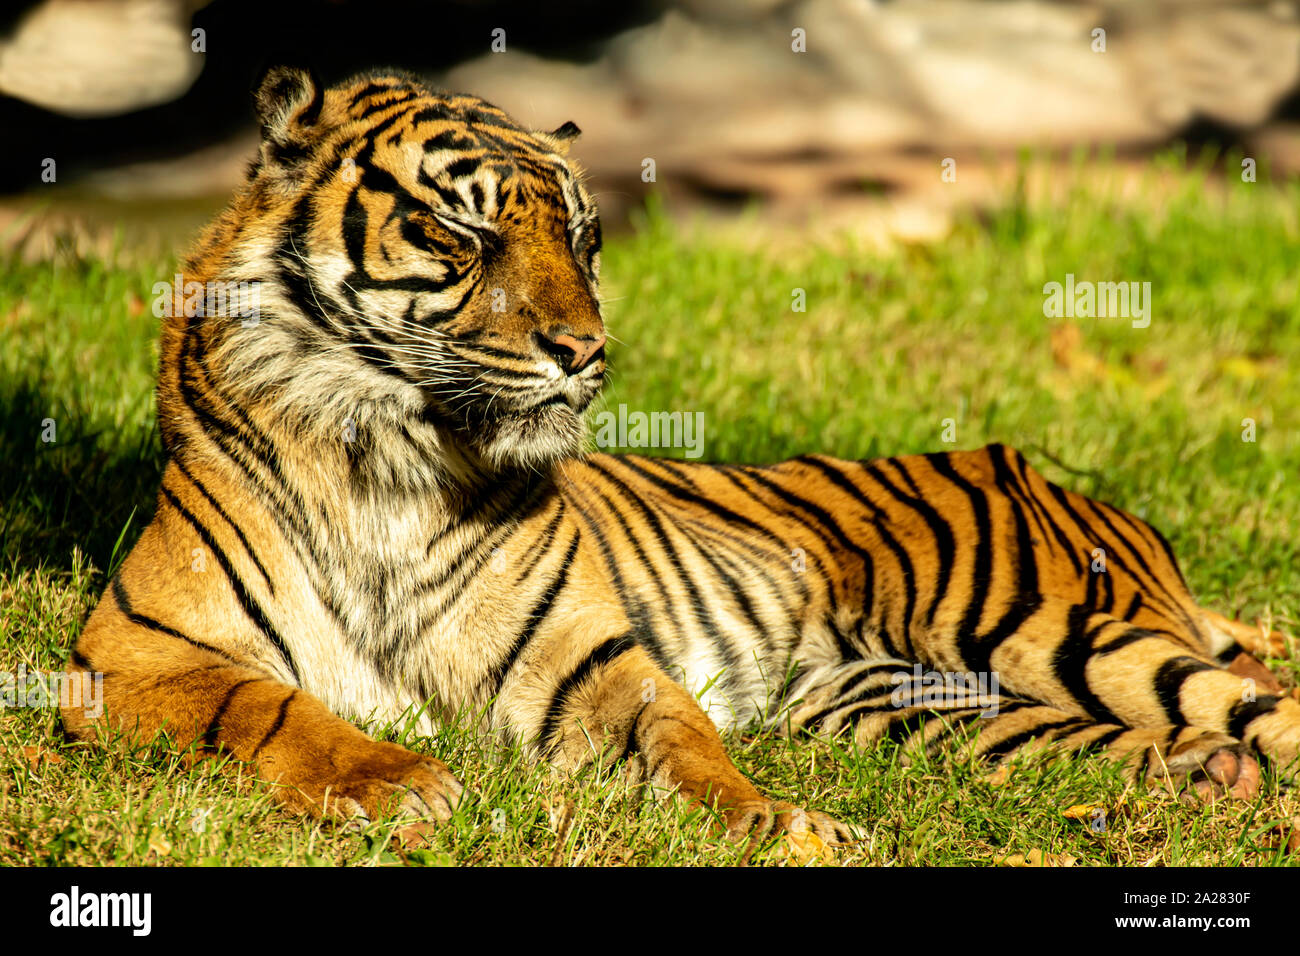 Sumatran Tiger Sunbathing at Paignton Zoo, Devon, UK. These were listed as Critically Endangered on the IUCN Red List in 2008, Stock Photo